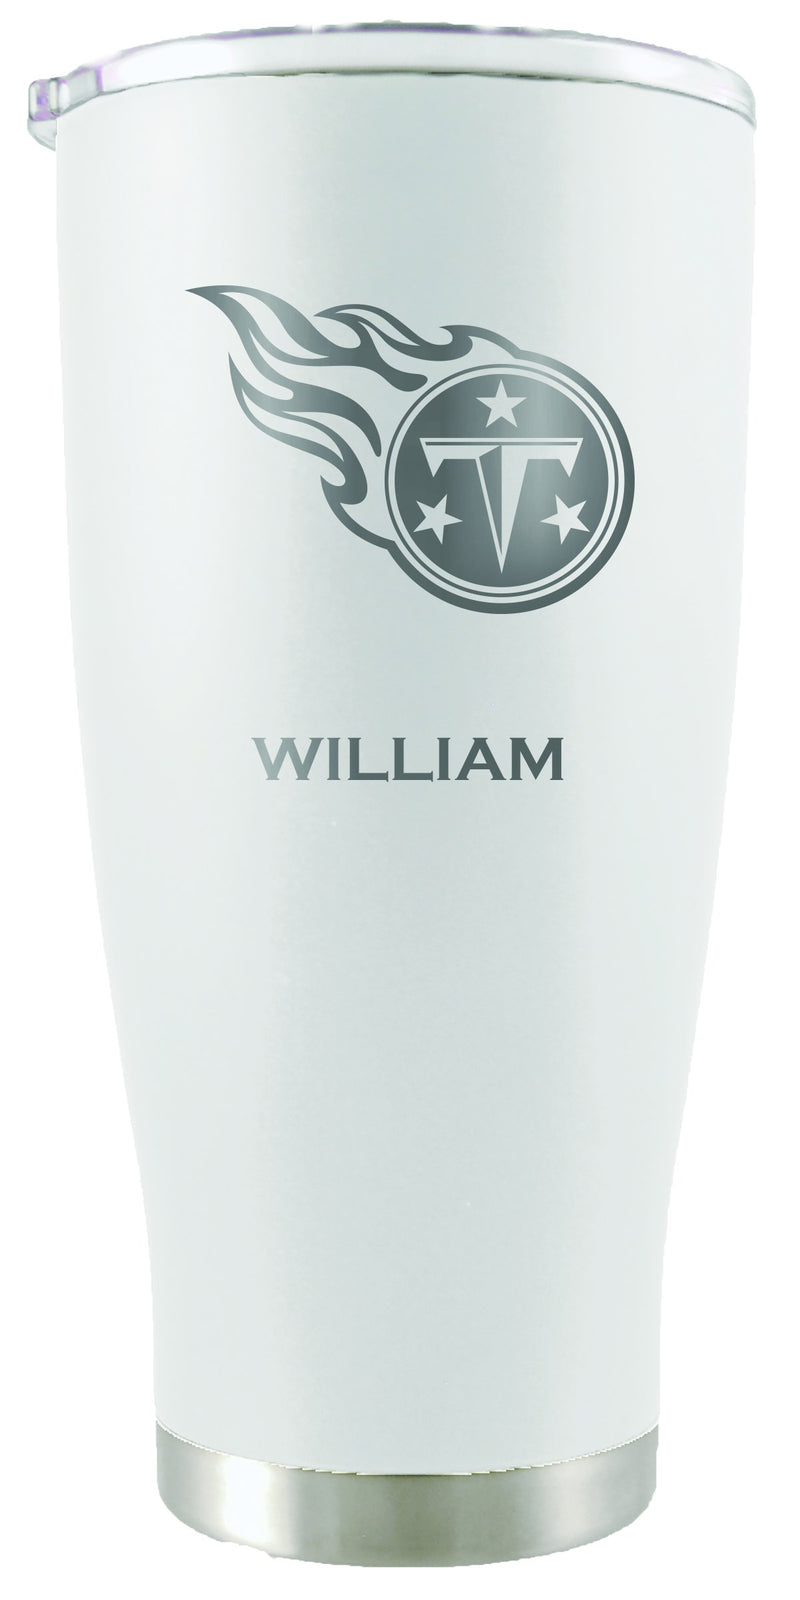 20oz White Personalized Stainless Steel Tumbler | Tennessee Titans
20oz, CurrentProduct, Drinkware_category_All, NFL, Personalized_Personalized, Tennessee Titans, TTI
The Memory Company